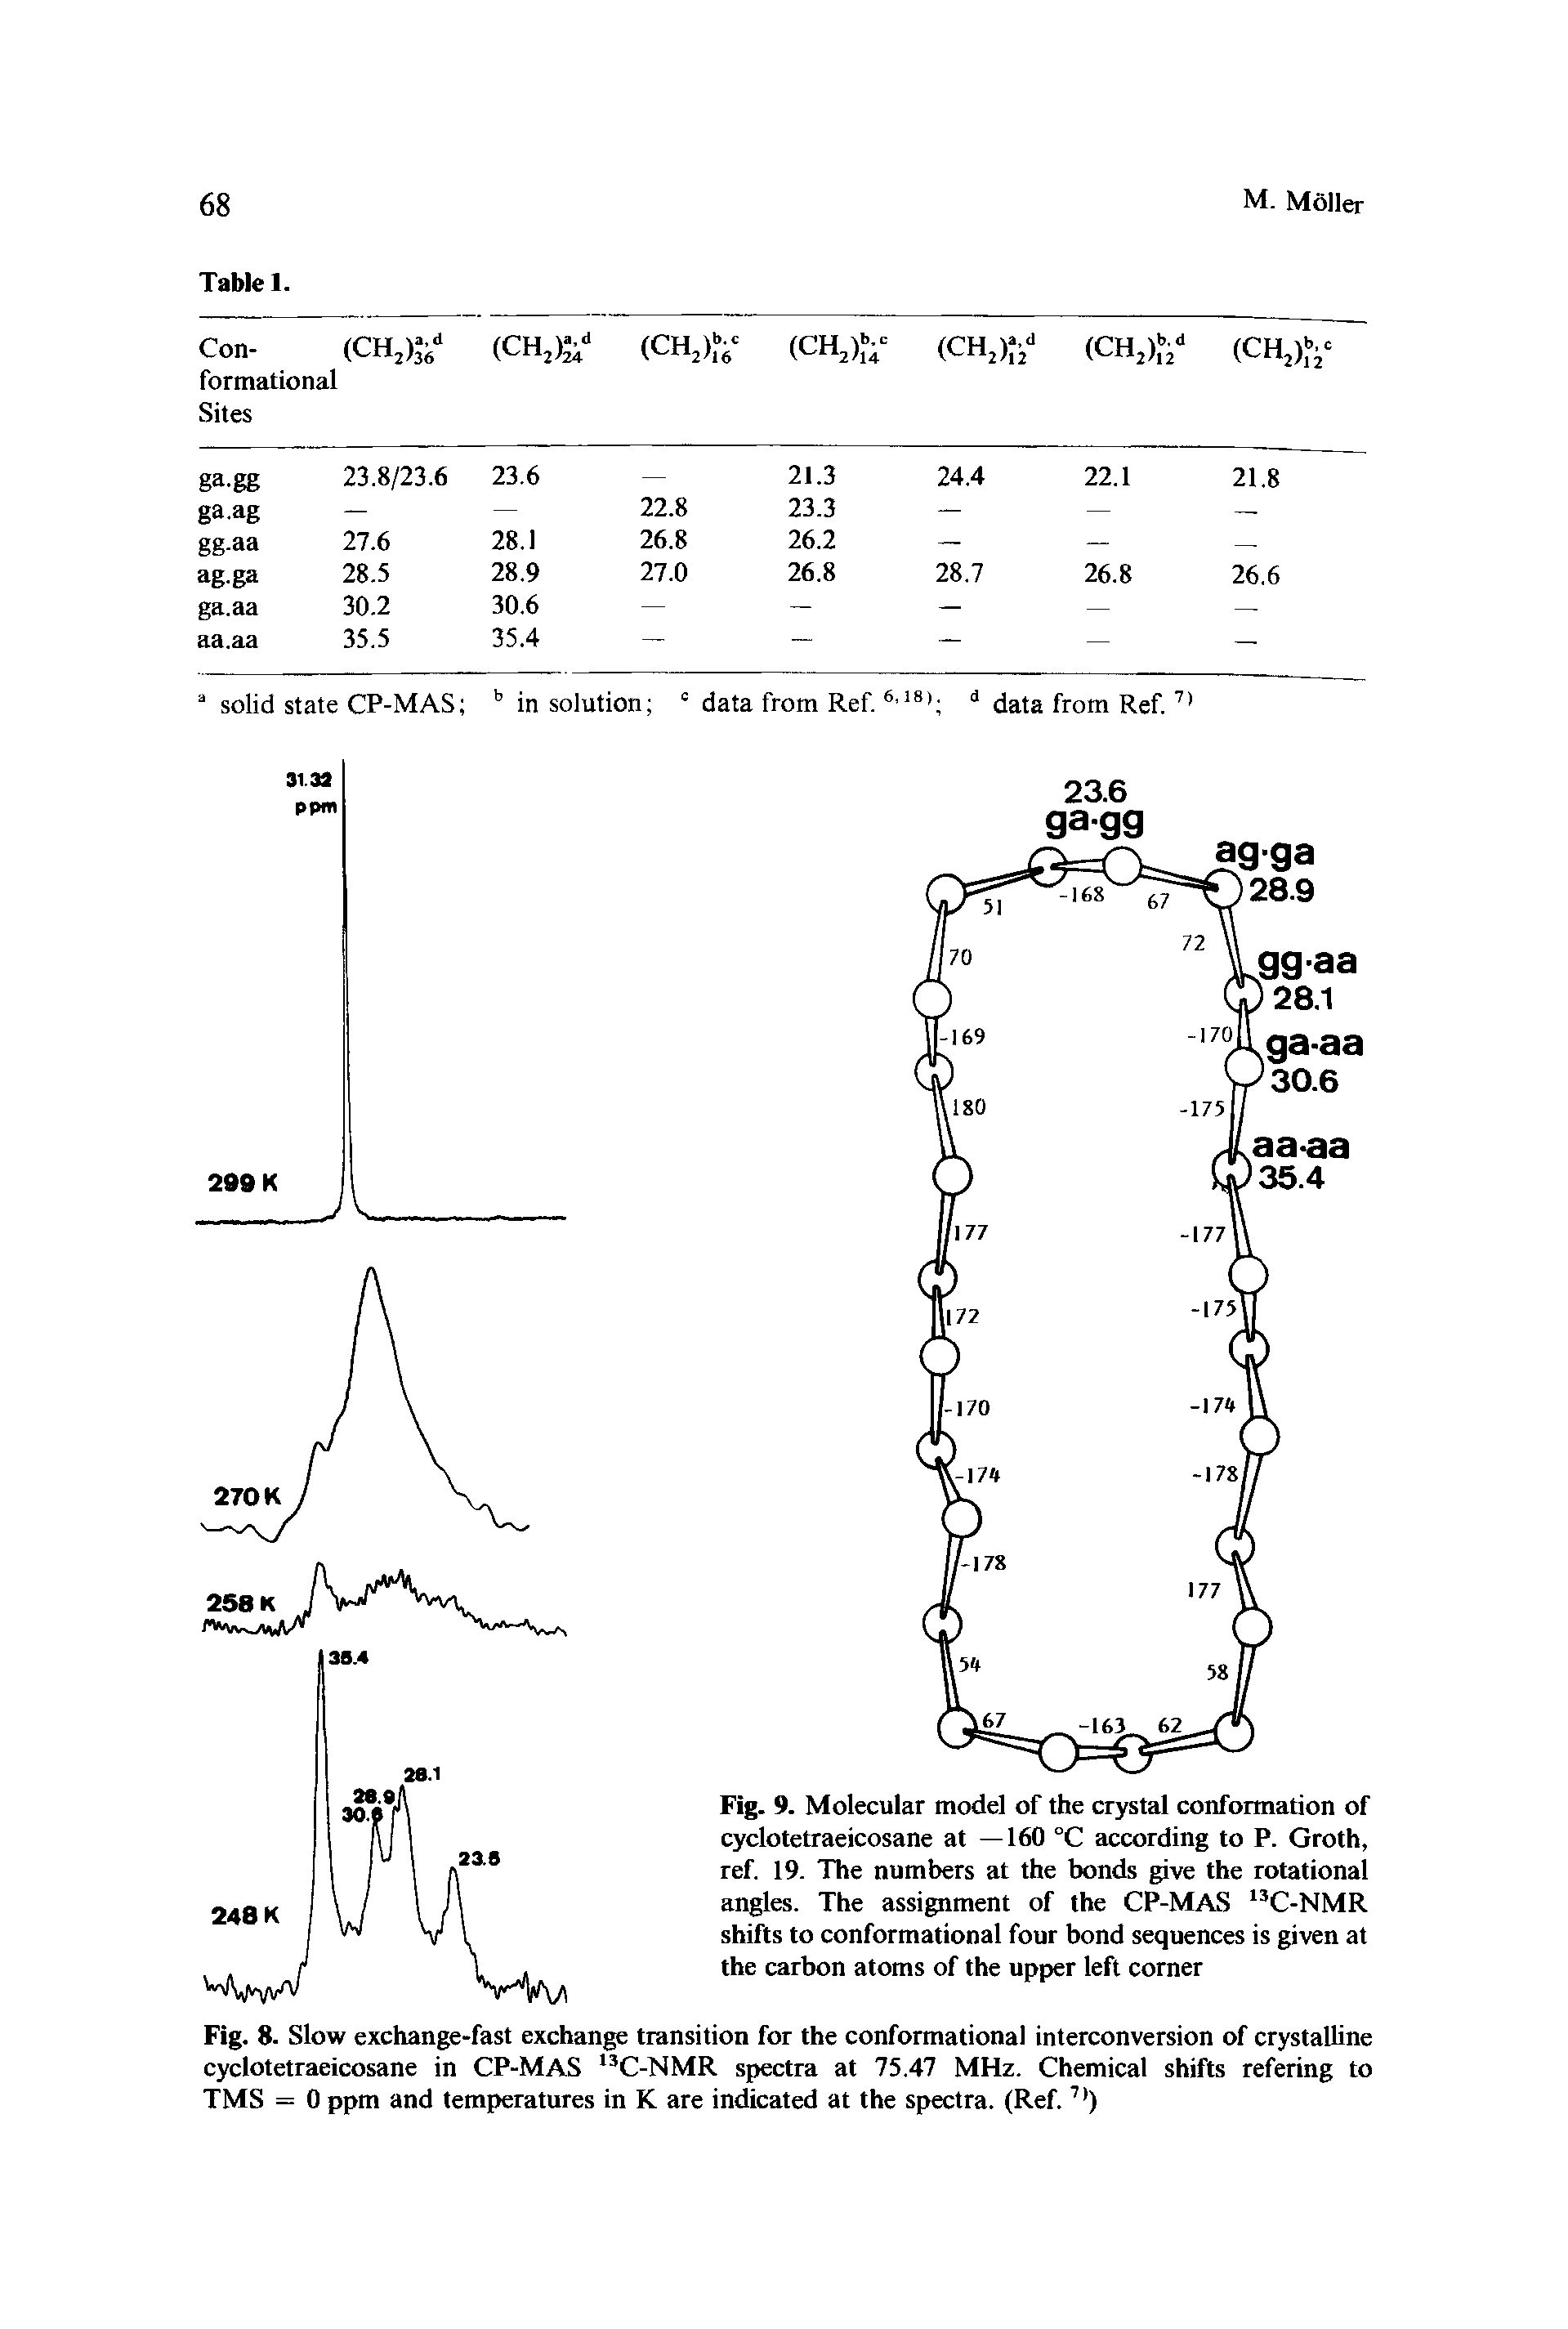 Fig. 8. Slow exchange-fast exchange transition for the conformational interconversion of crystalline cyclotetraeicosane in CP-MAS l3C-NMR spectra at 75.47 MHz. Chemical shifts refering to TMS = 0 ppm and temperatures in K are indicated at the spectra. (Ref.7 )...